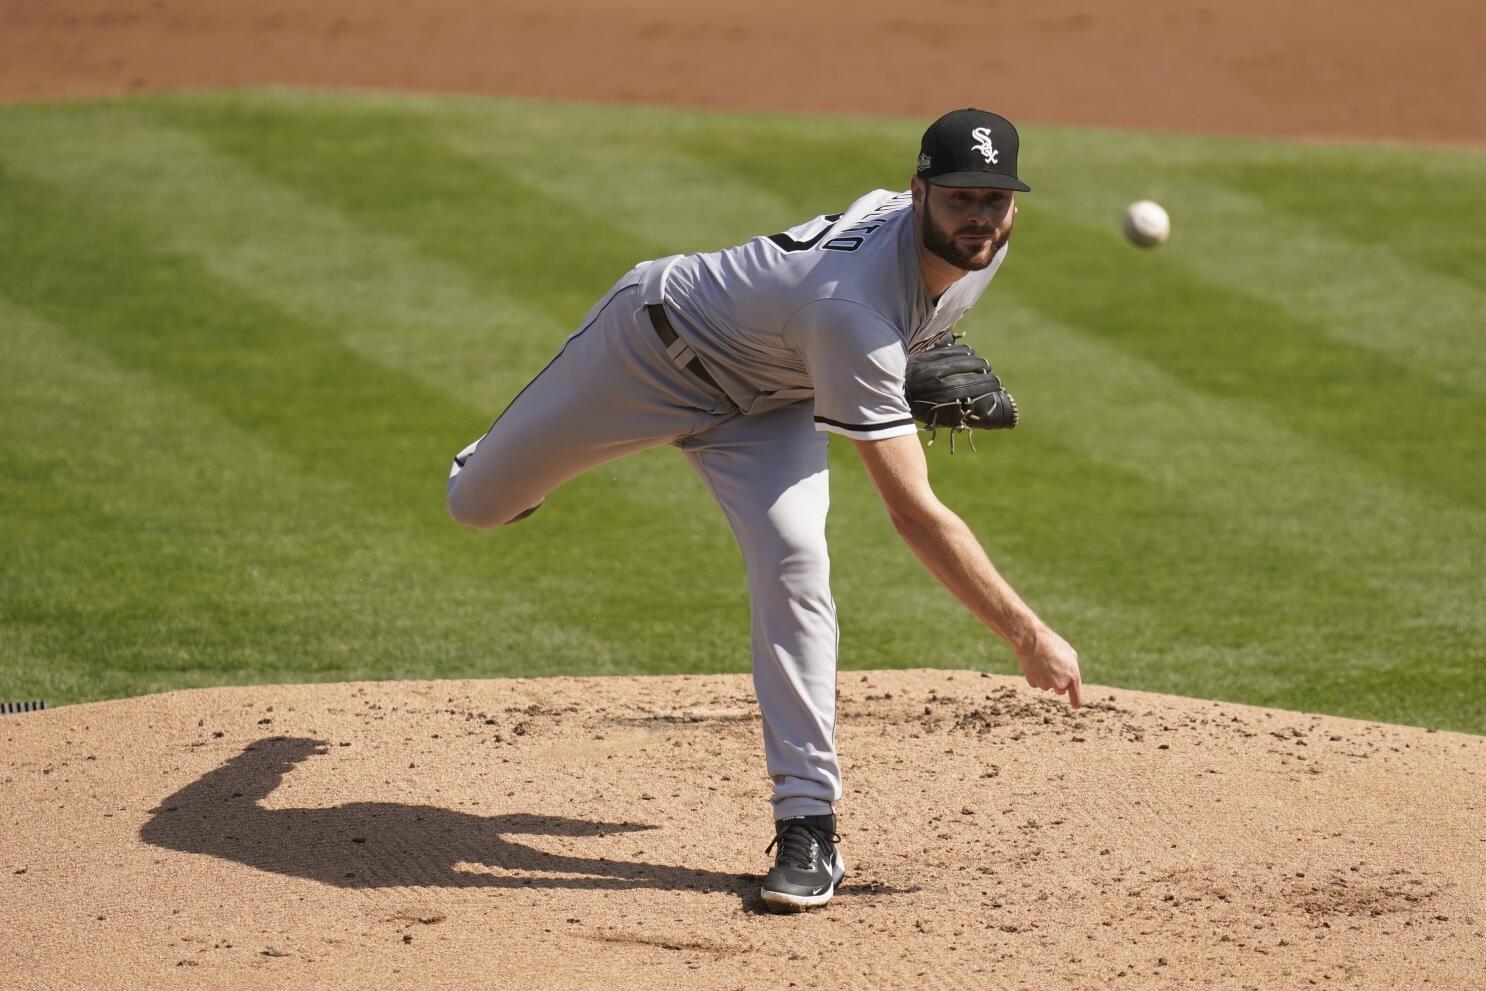 Lucas Giolito injury: White Sox ace exits Friday vs. Tigers with